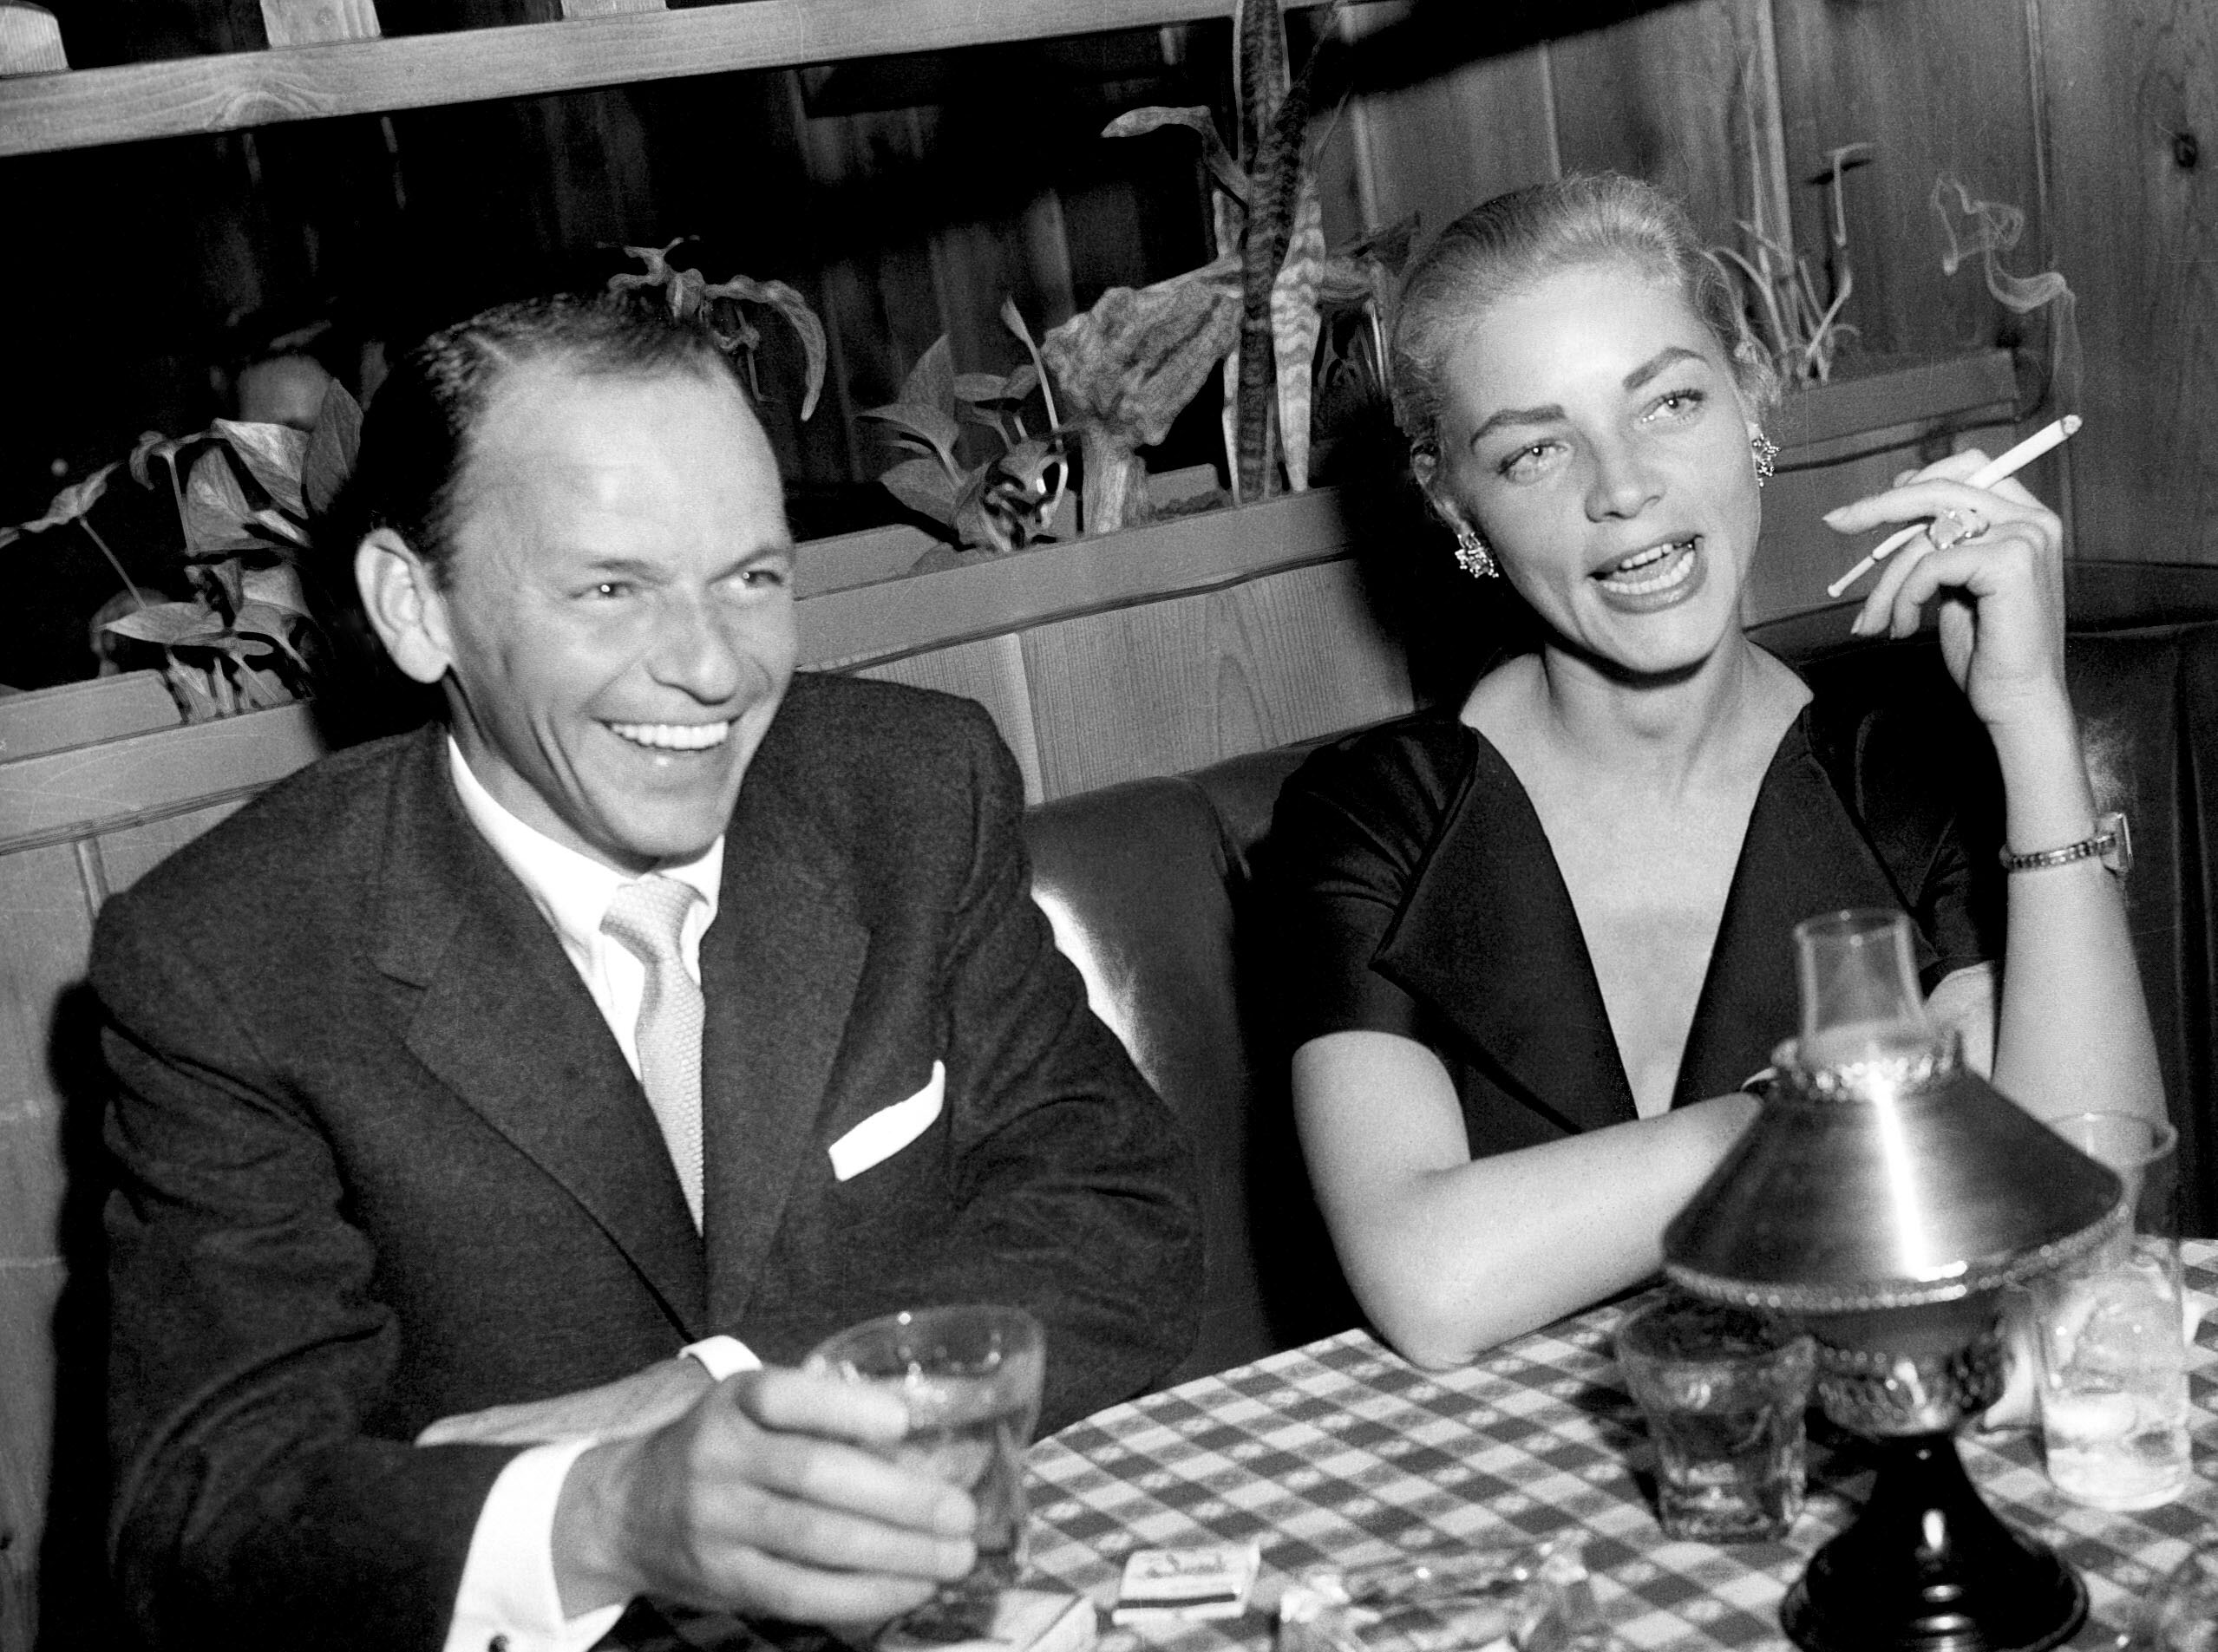 Frank Sinatra and Lauren Bacall